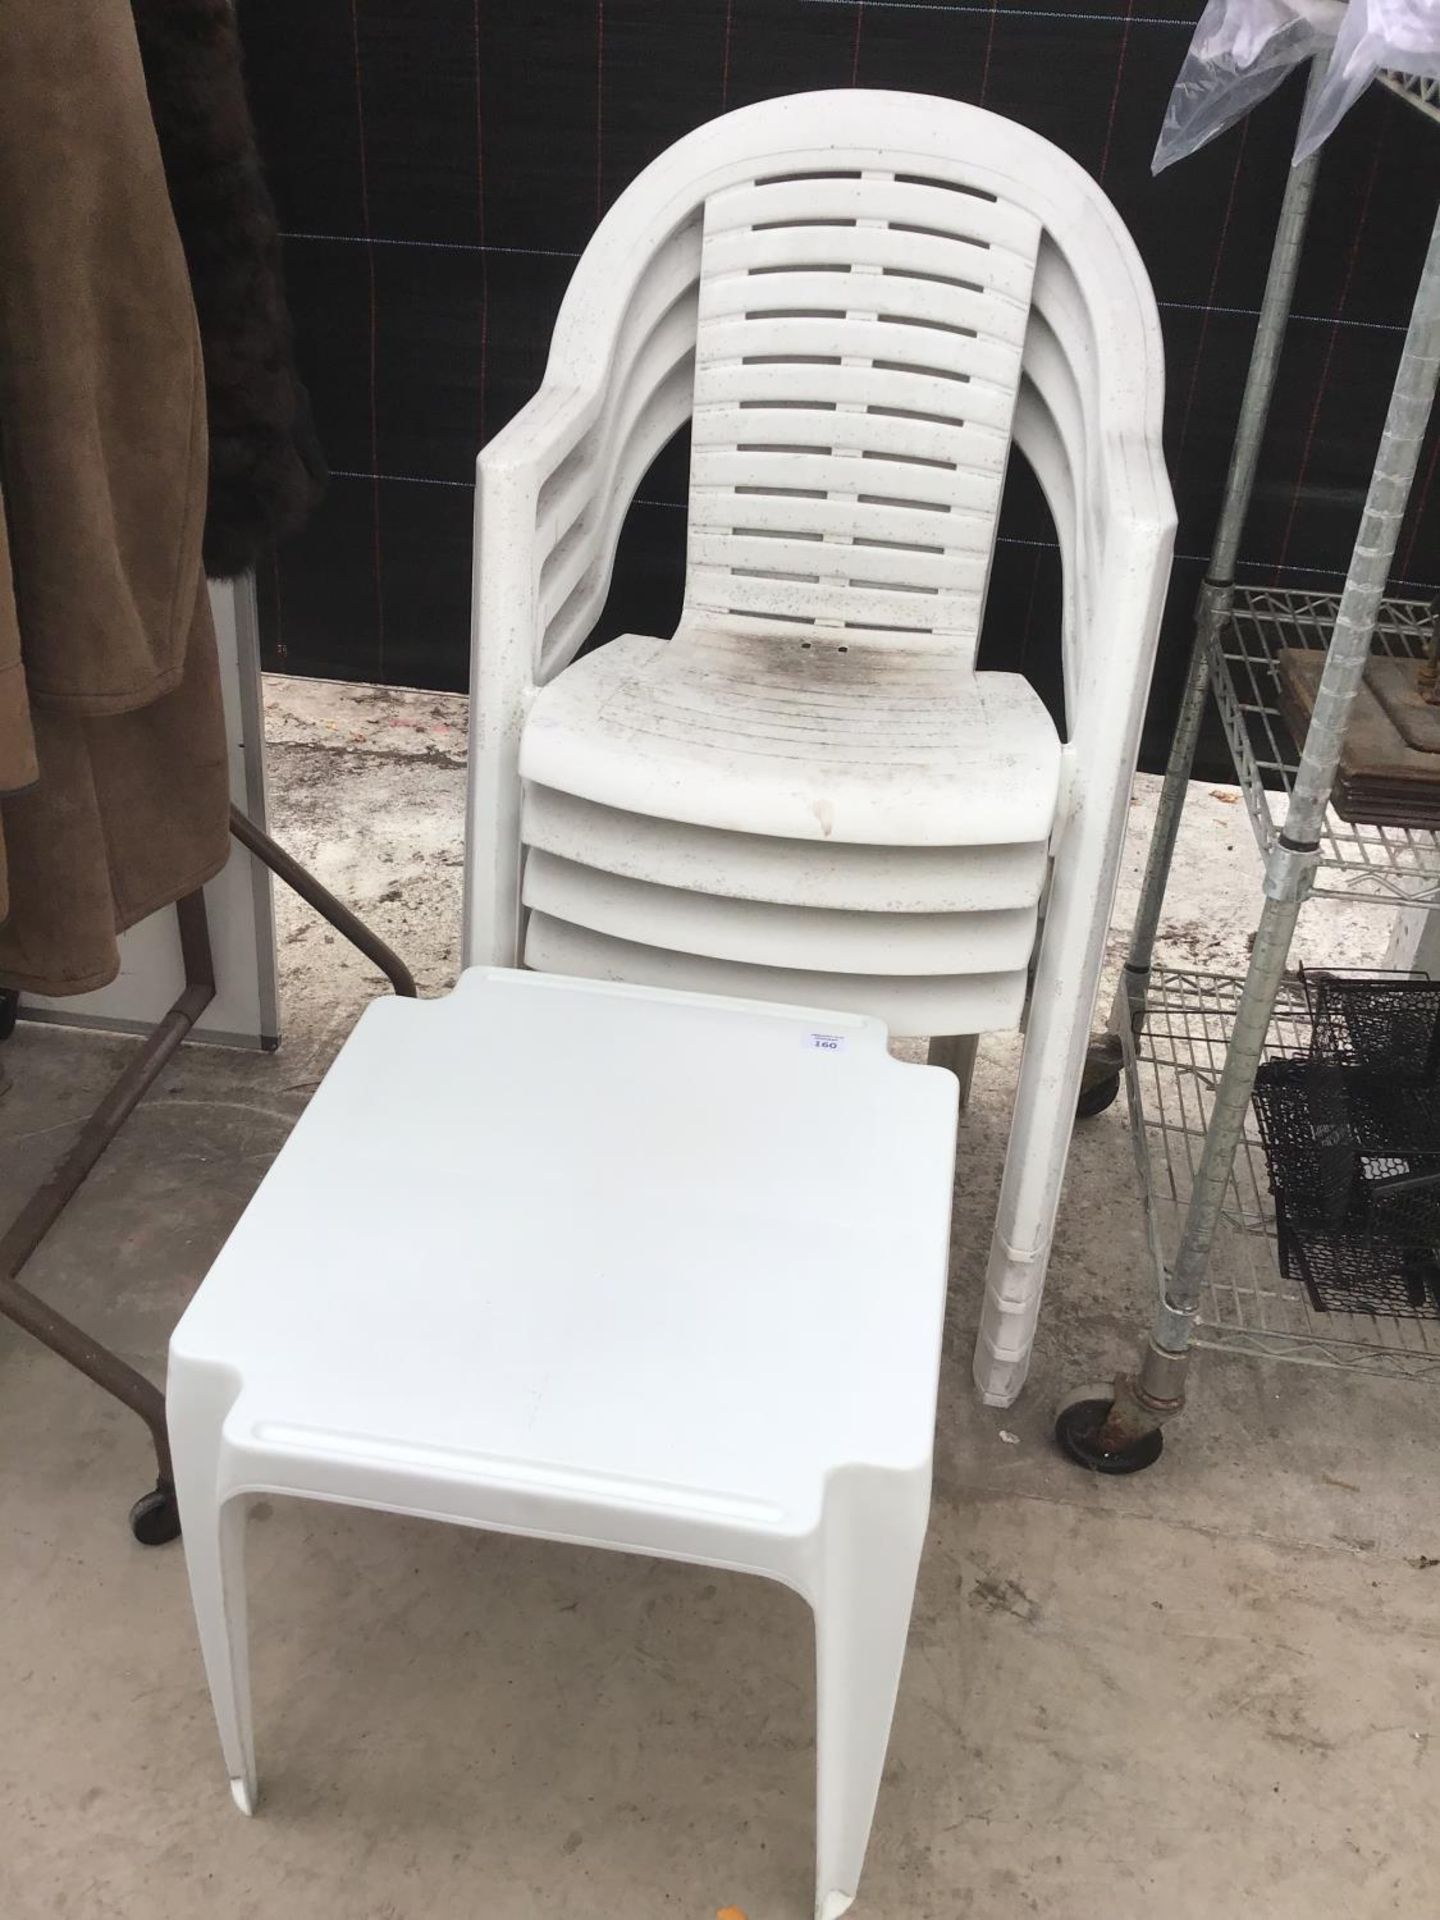 FOUR WHITE PLASTIC GARDEN CHAIRS AND A SQUARE TABLE